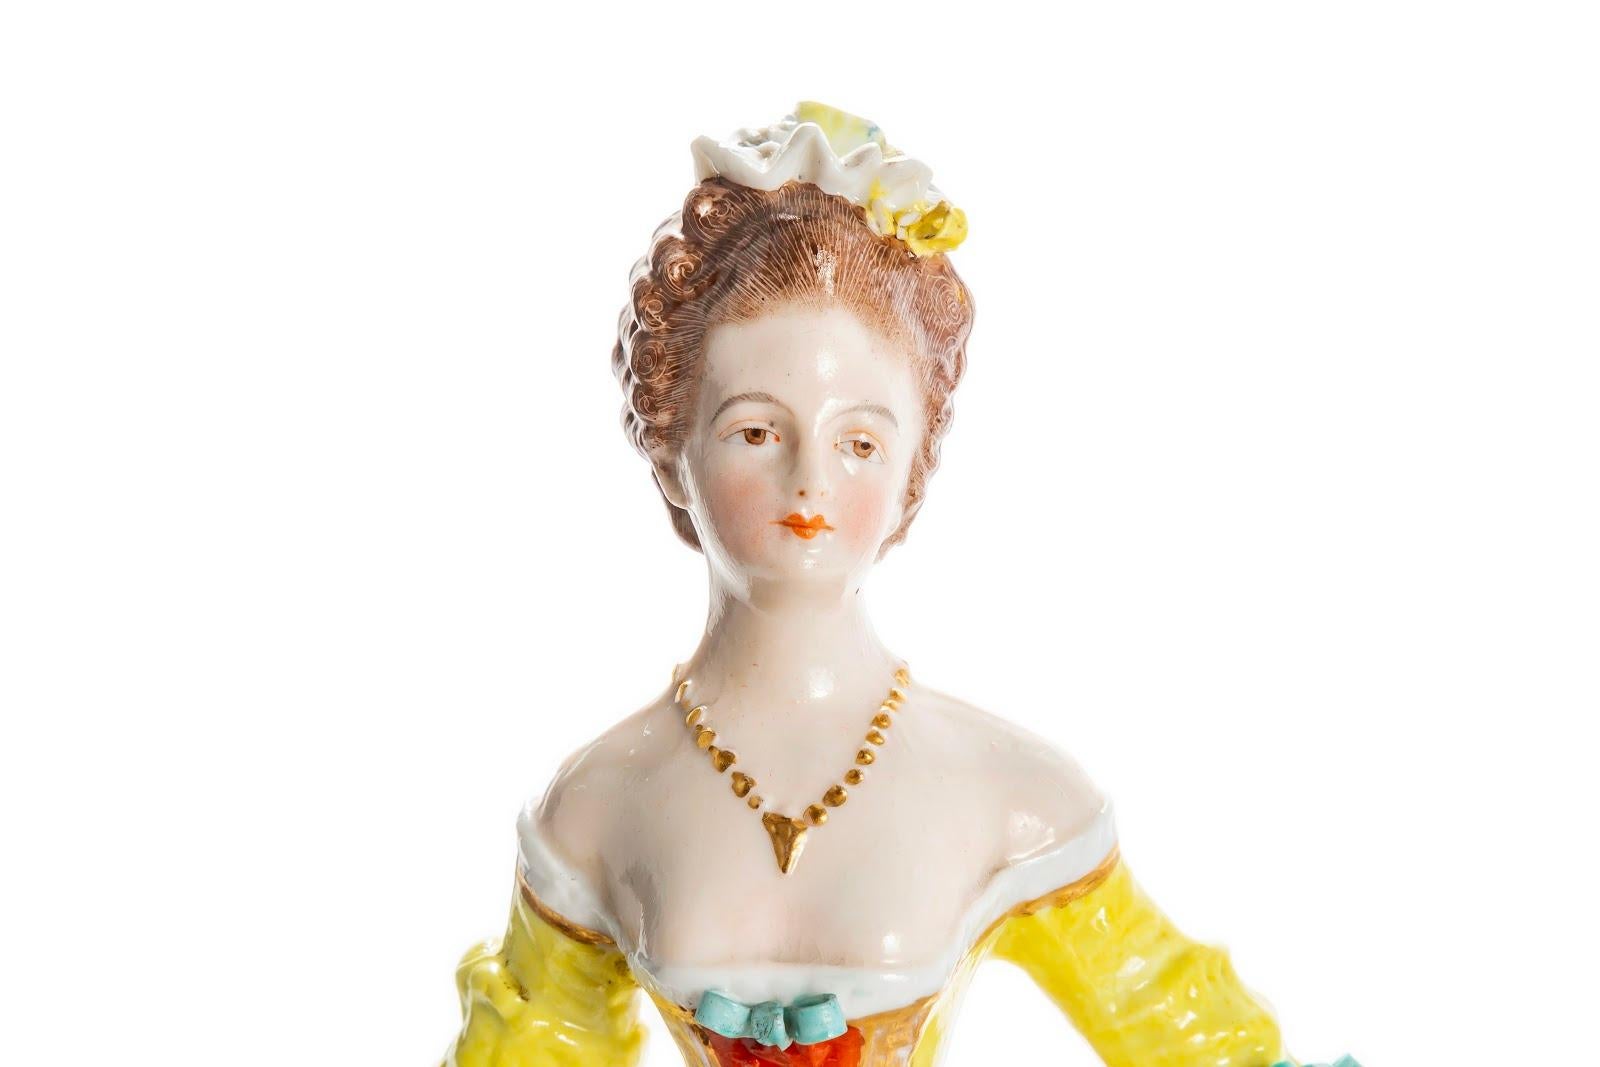 Porcelain Lady In Yellow Dress - White Figurative Sculpture by Unknown